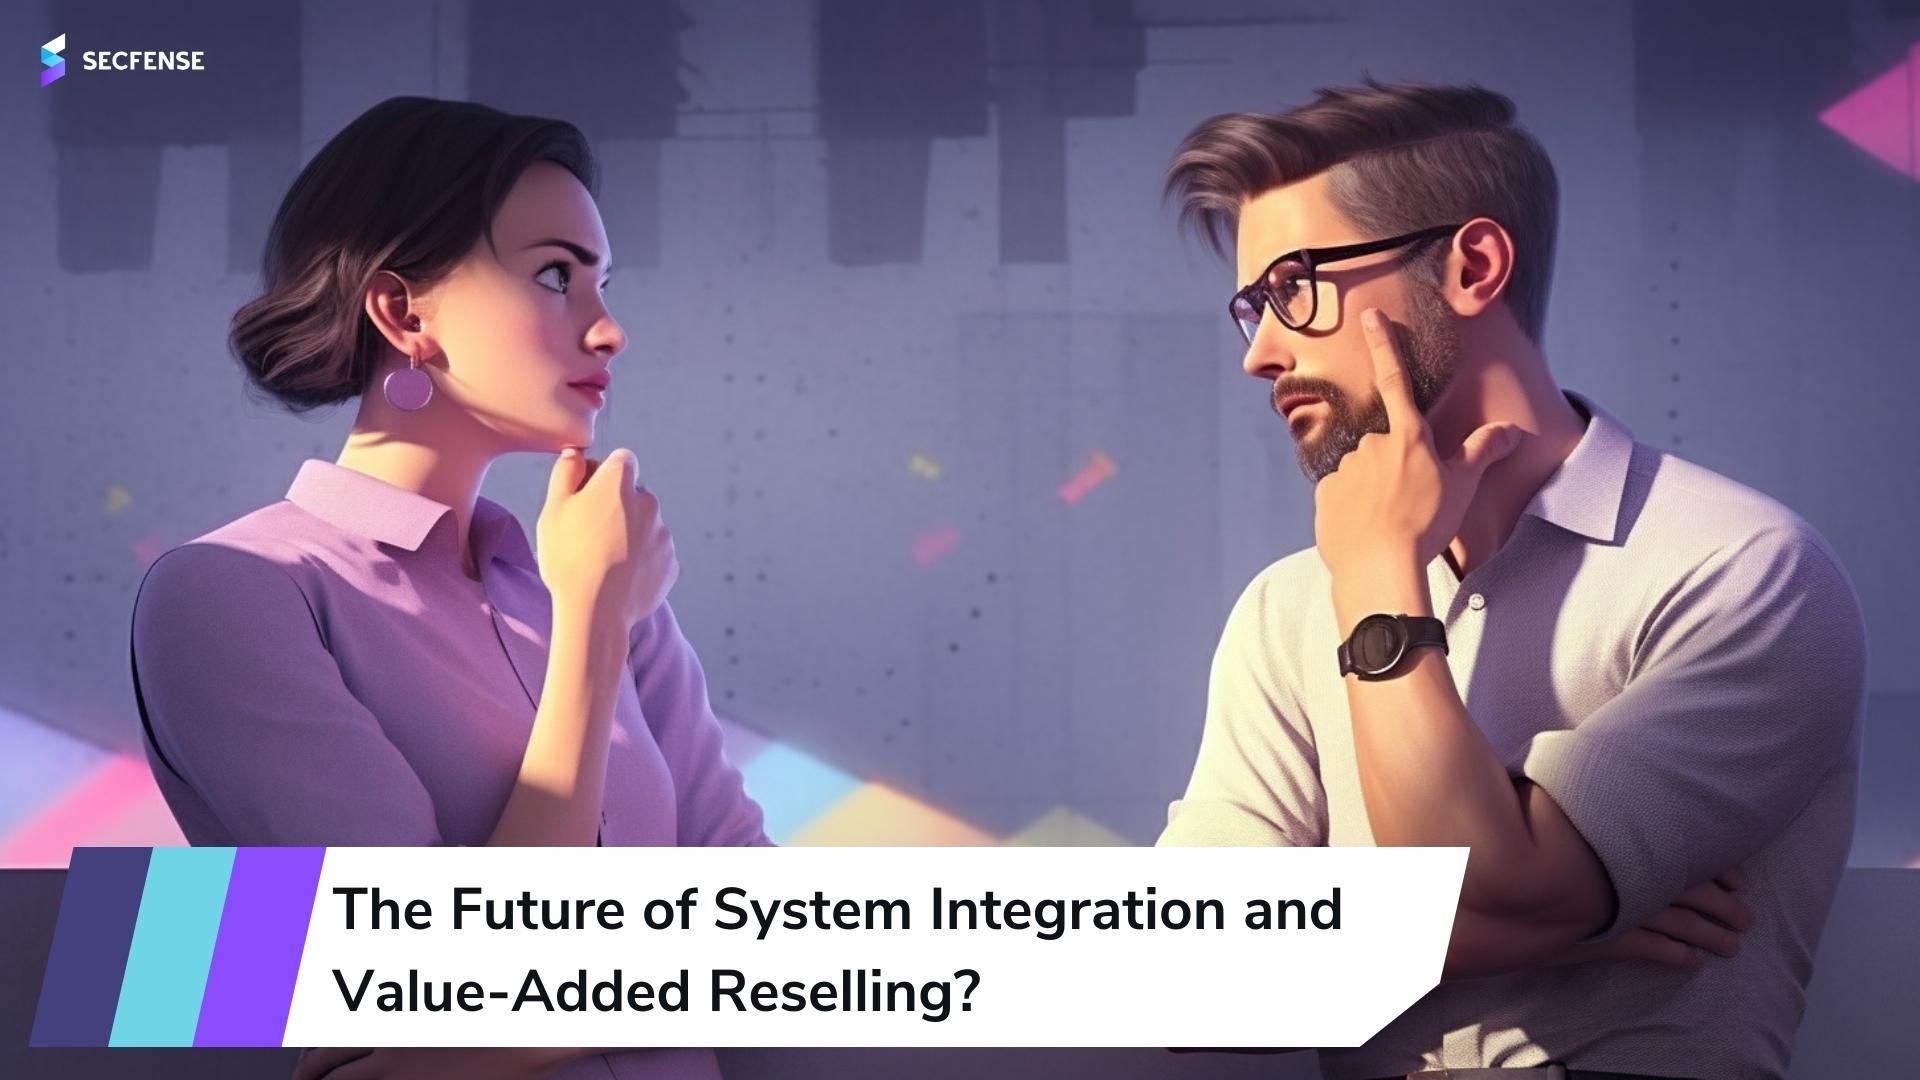 The Future of System Integration and Value-Added Reselling: No Implementation, No Coding, and Endless Benefits